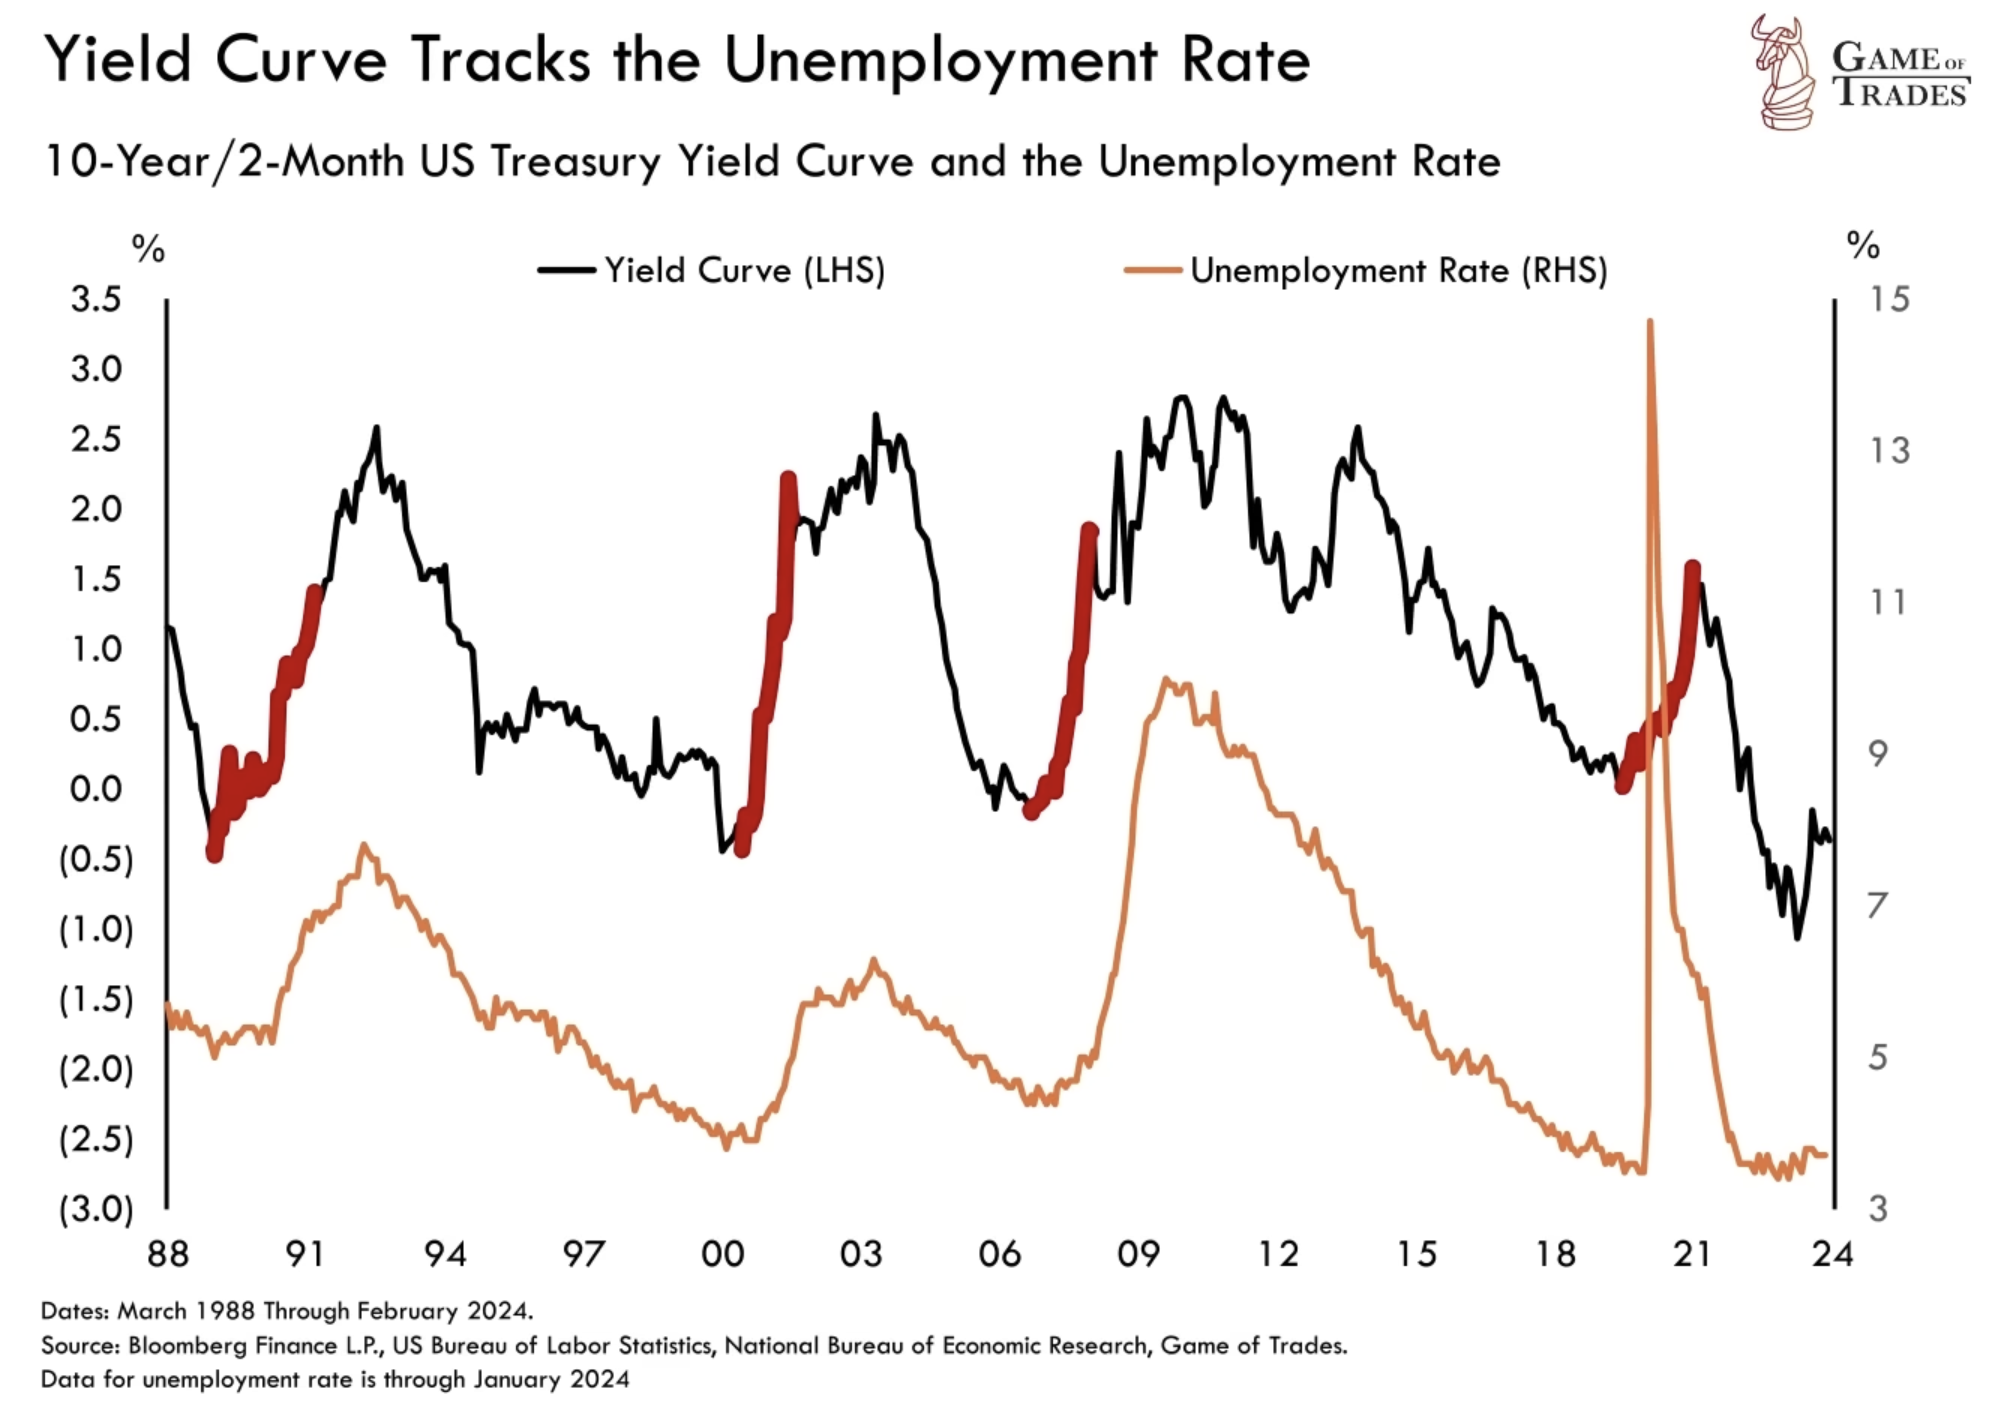 Yield curve and unemployment rate